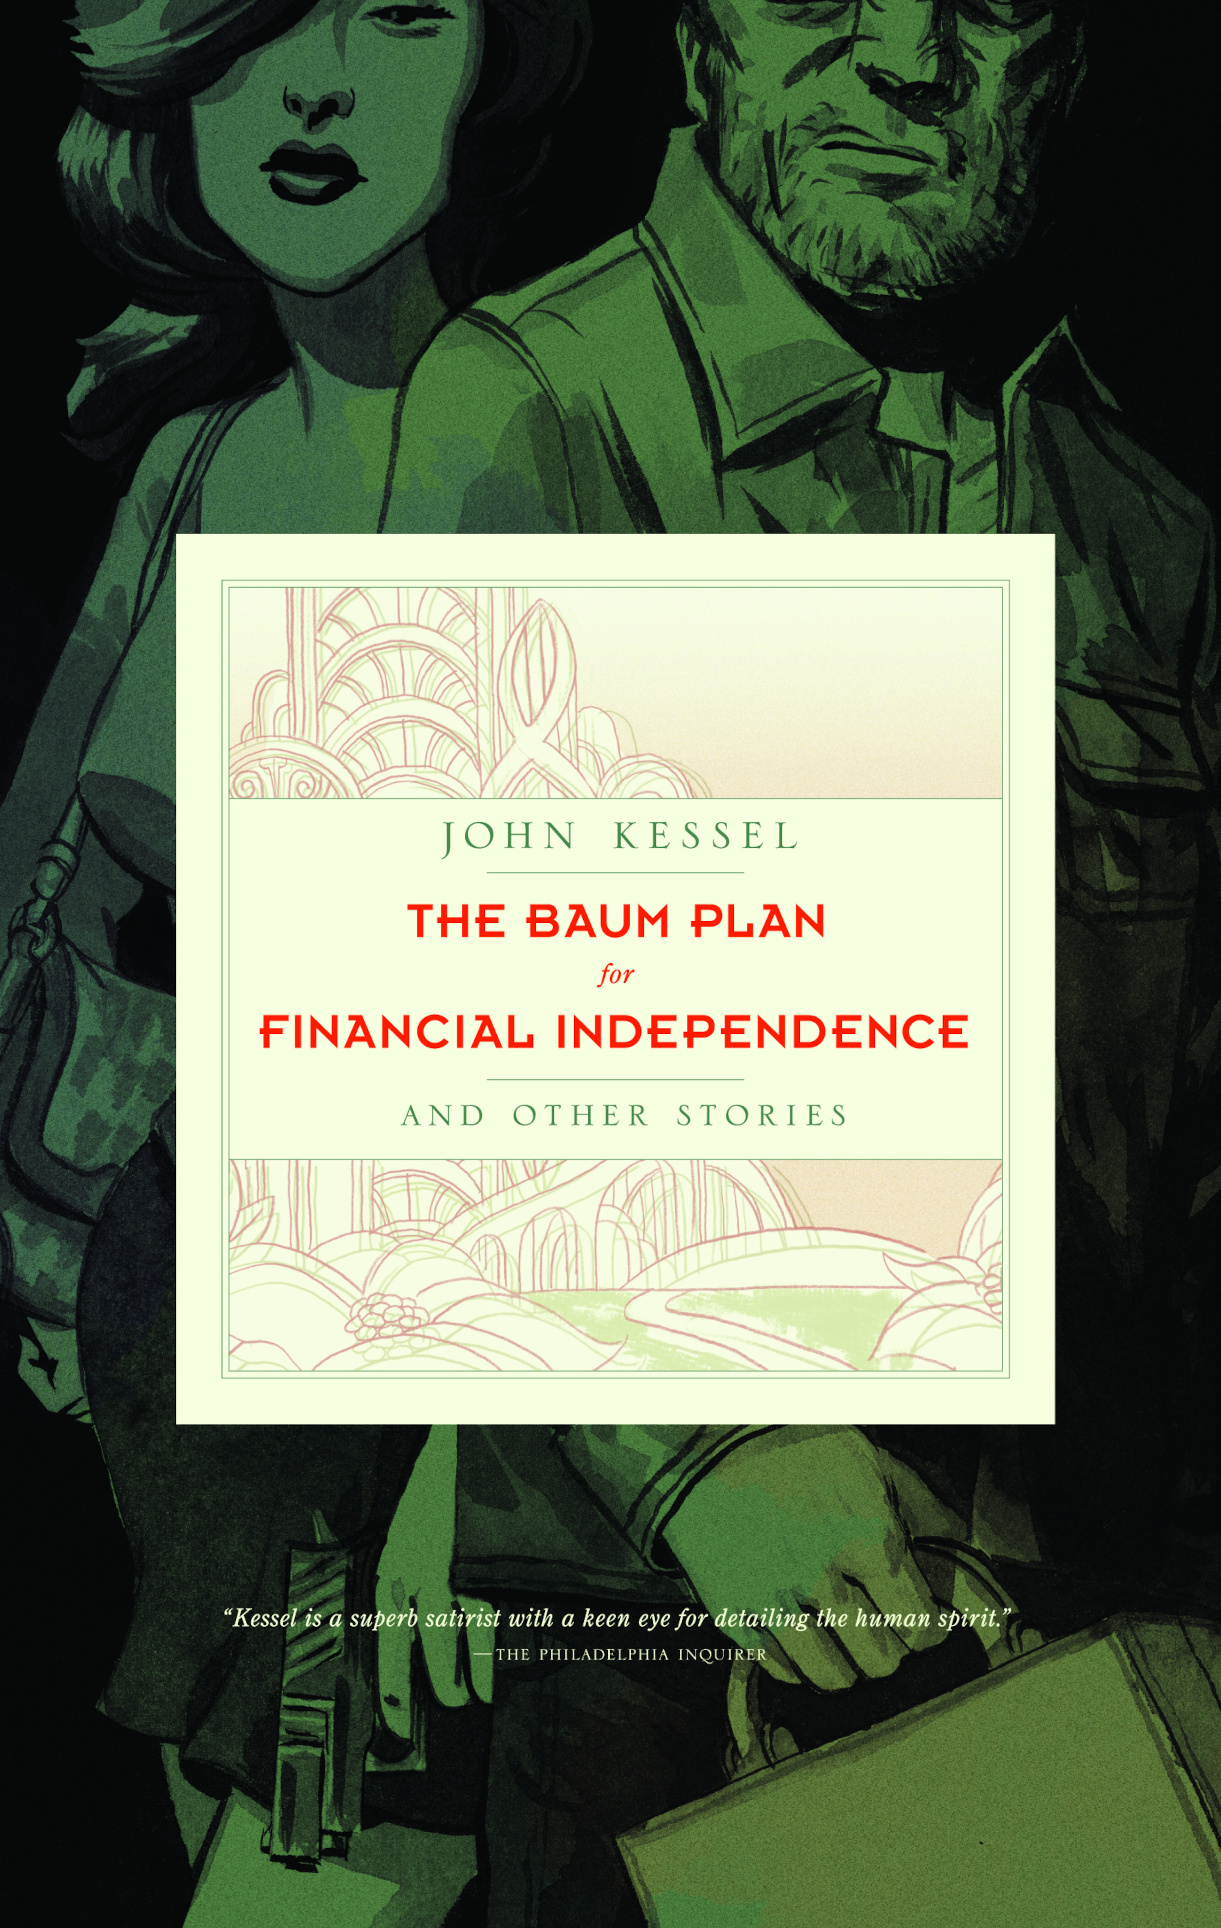 John Kessel: The Baum Plan for Financial Independence (Paperback, 2008, Small Beer Press)